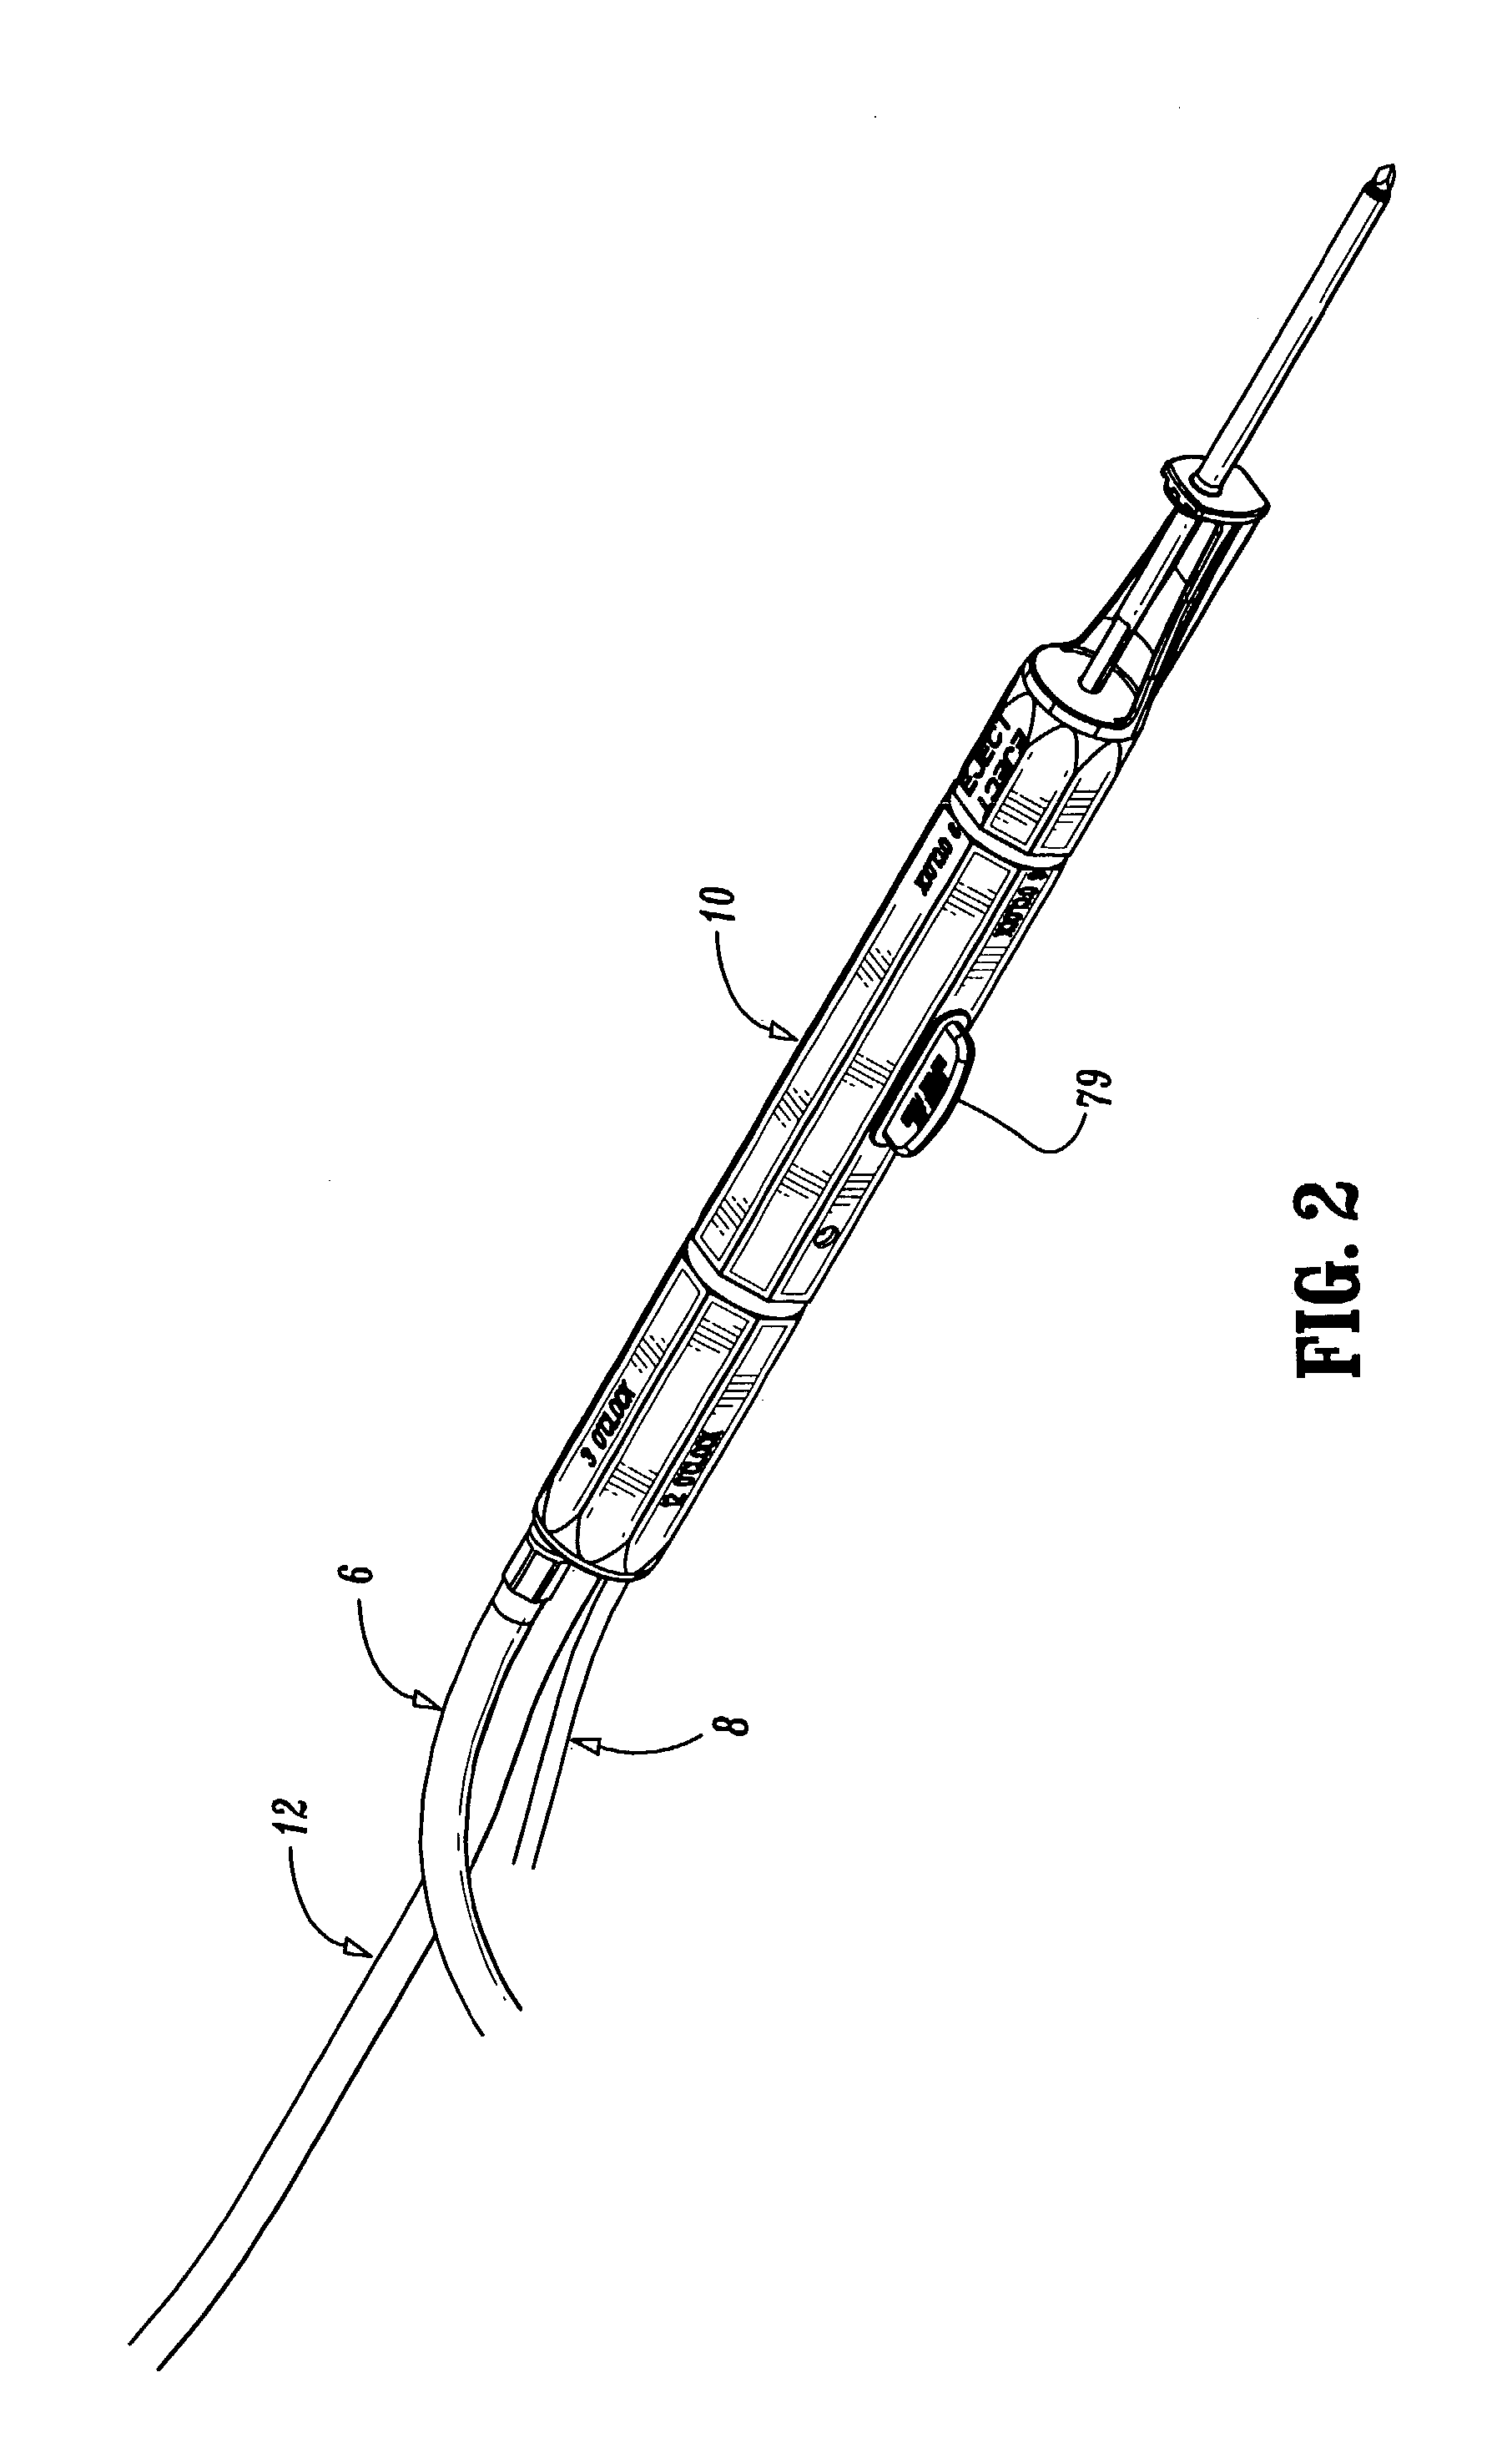 Biopsy system having a single use loading unit operable with a trocar driver, a knife driver and firing module